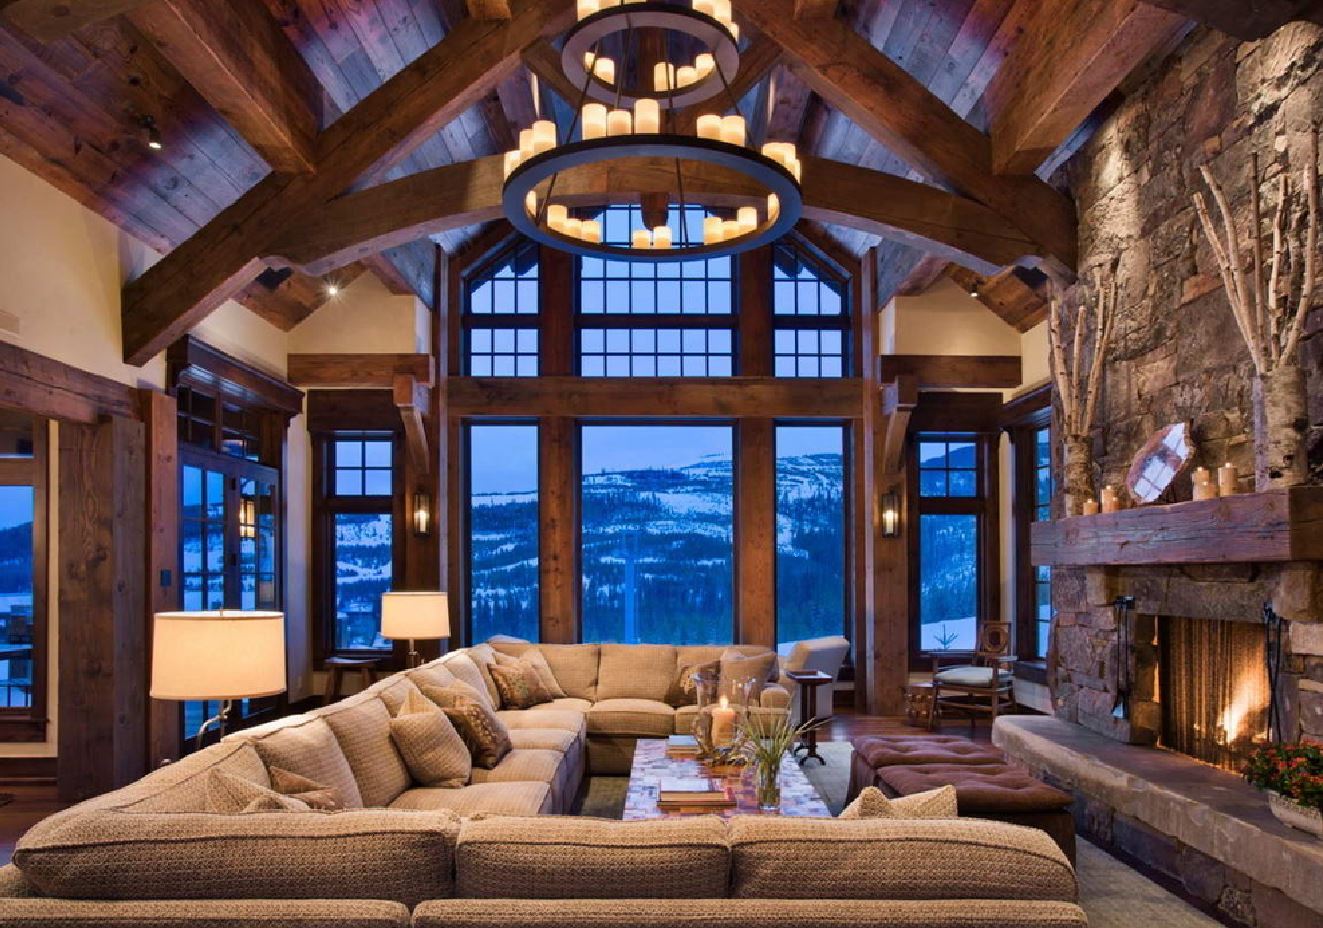 20-most-incredible-living-rooms-19